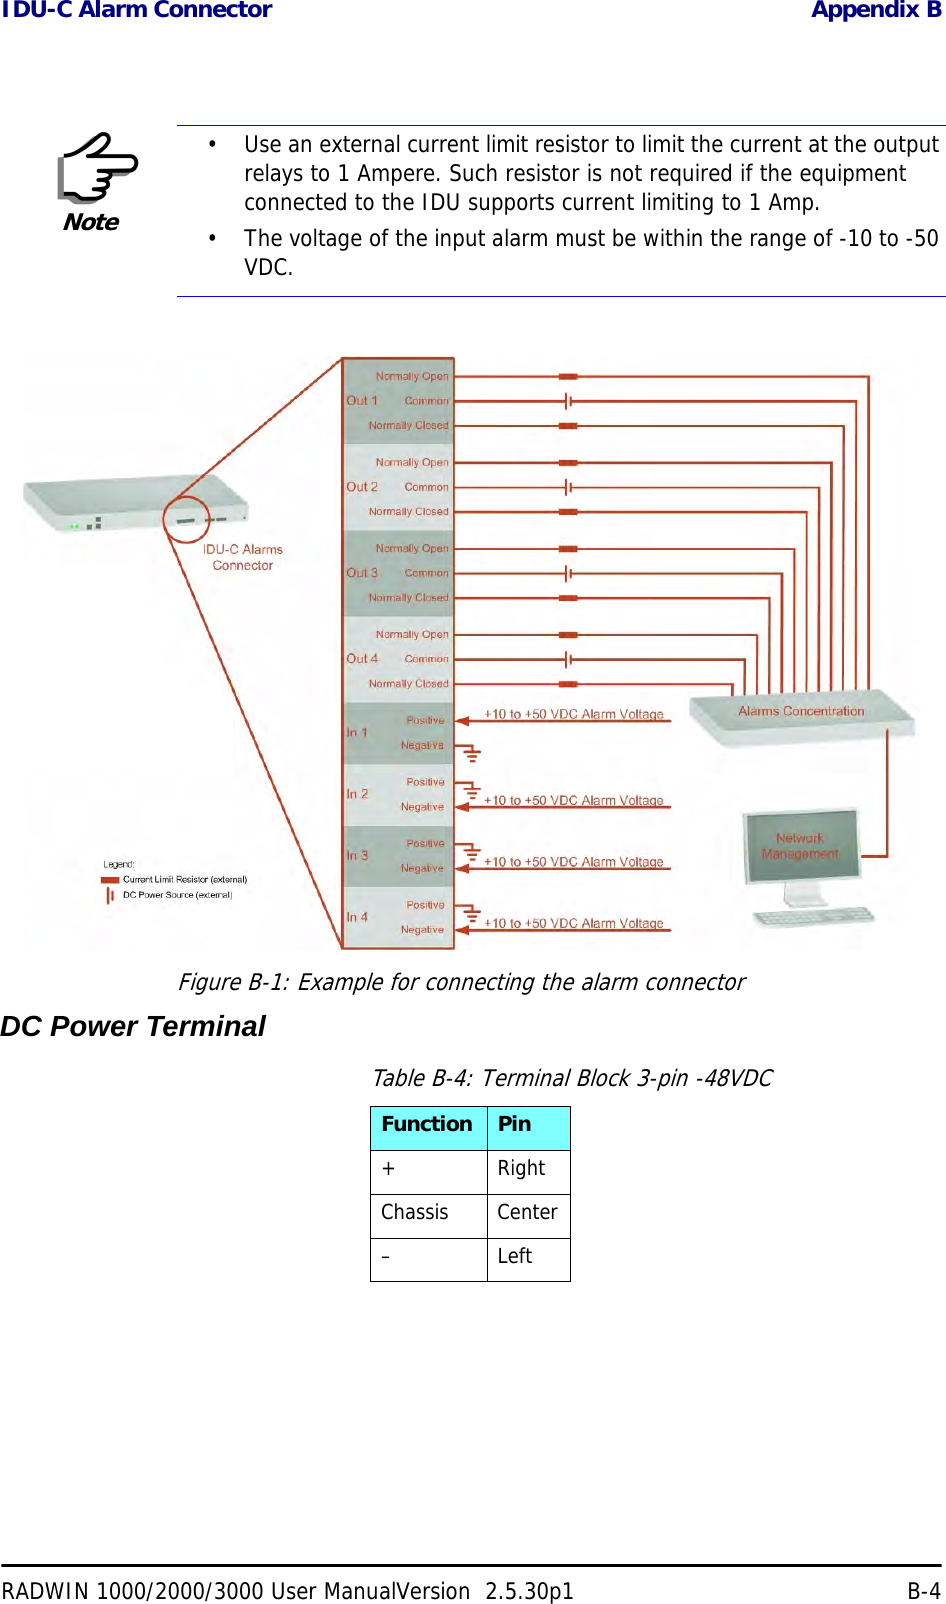 IDU-C Alarm Connector Appendix BRADWIN 1000/2000/3000 User ManualVersion  2.5.30p1 B-4Figure B-1: Example for connecting the alarm connectorDC Power TerminalNote• Use an external current limit resistor to limit the current at the output relays to 1 Ampere. Such resistor is not required if the equipment connected to the IDU supports current limiting to 1 Amp.• The voltage of the input alarm must be within the range of -10 to -50 VDC.Table B-4: Terminal Block 3-pin -48VDCFunction Pin+RightChassis Center–Left